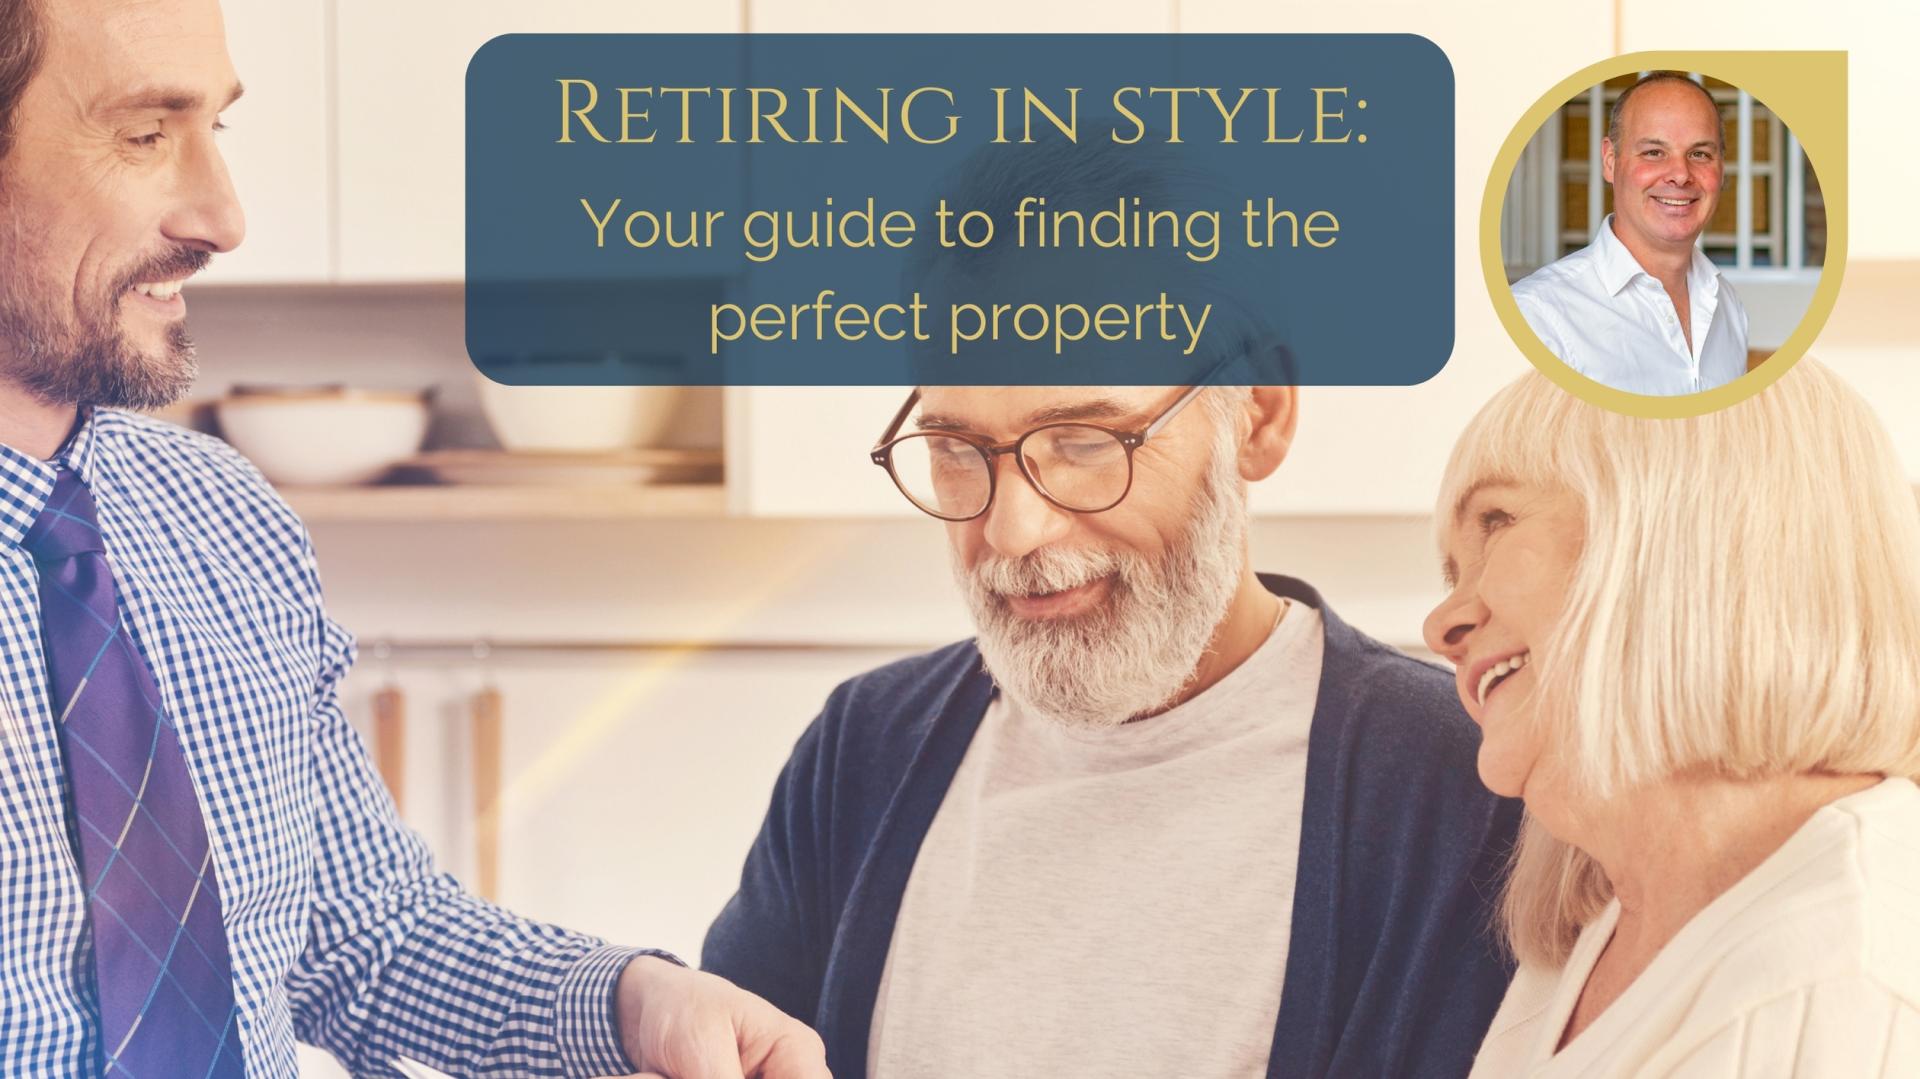 Retirement - buying the perfect property